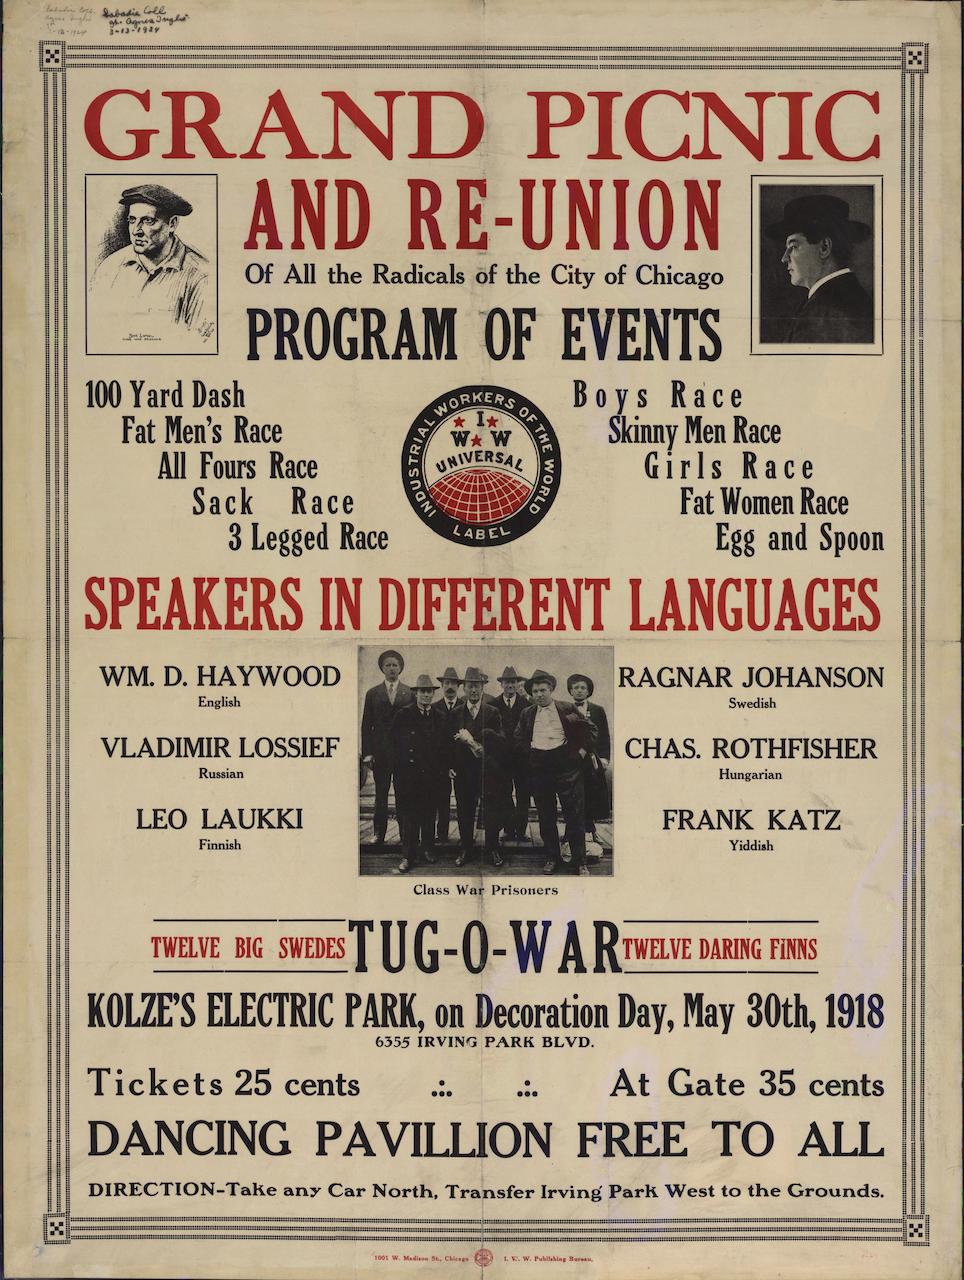 "Grand picnic and re-union of all the radicals of the city of Chicago" (1918), Industrial Workers of the World